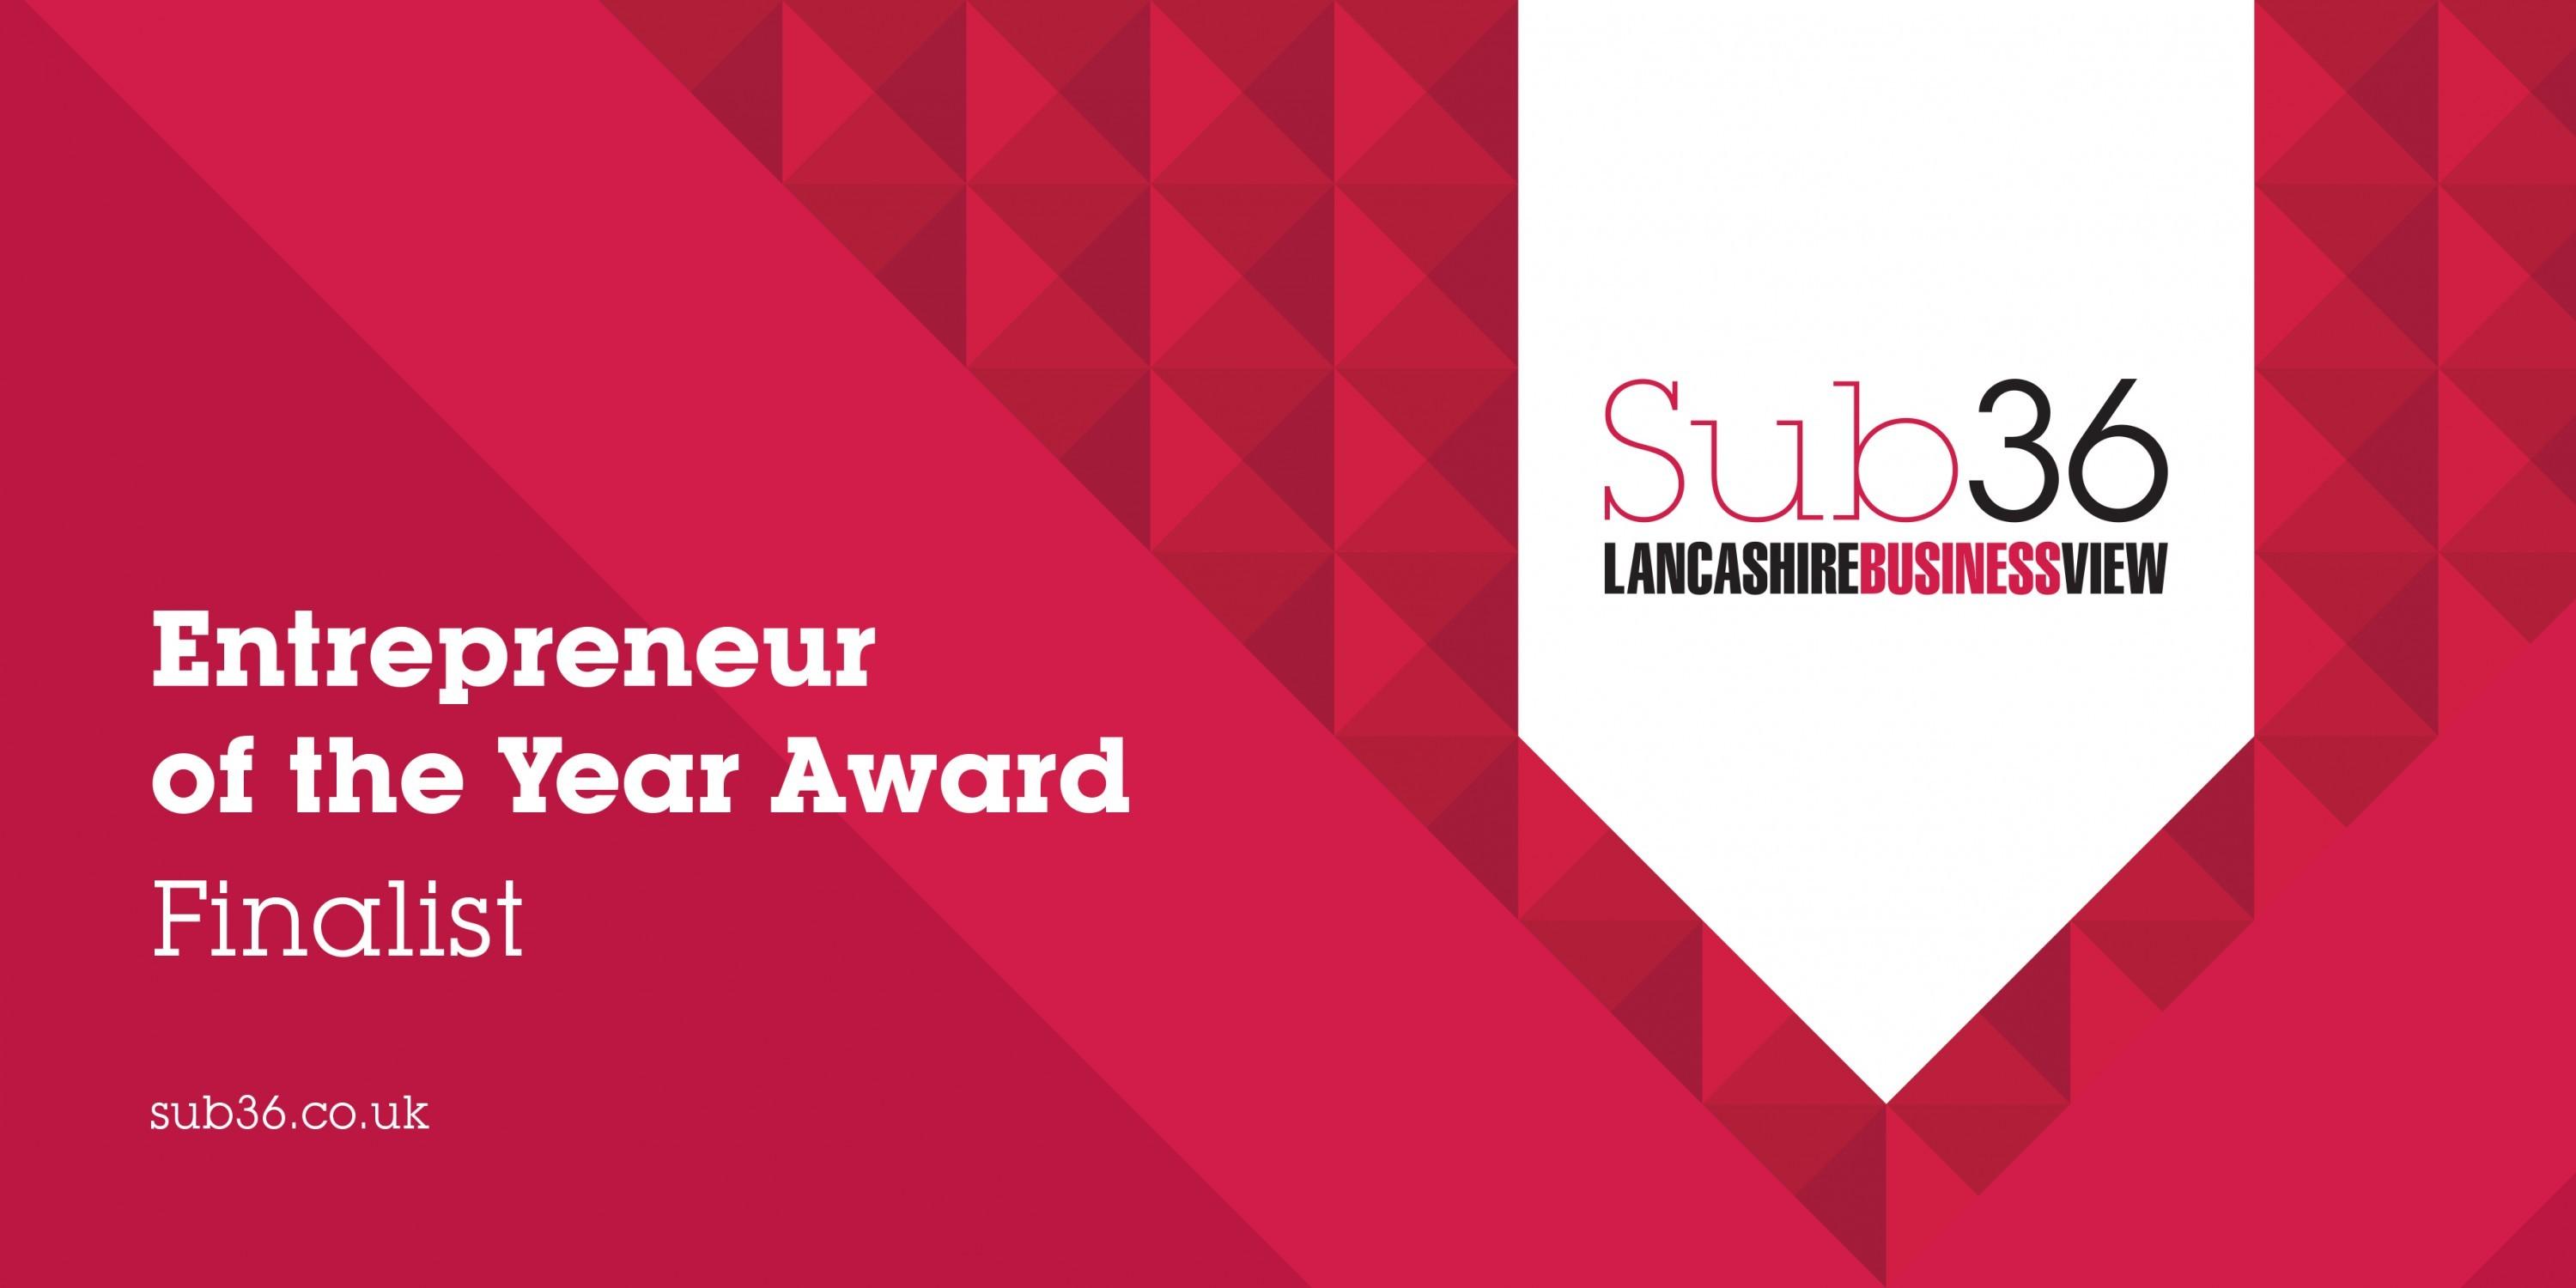 Our MD Has Been Shortlisted for the Sub 36 Awards